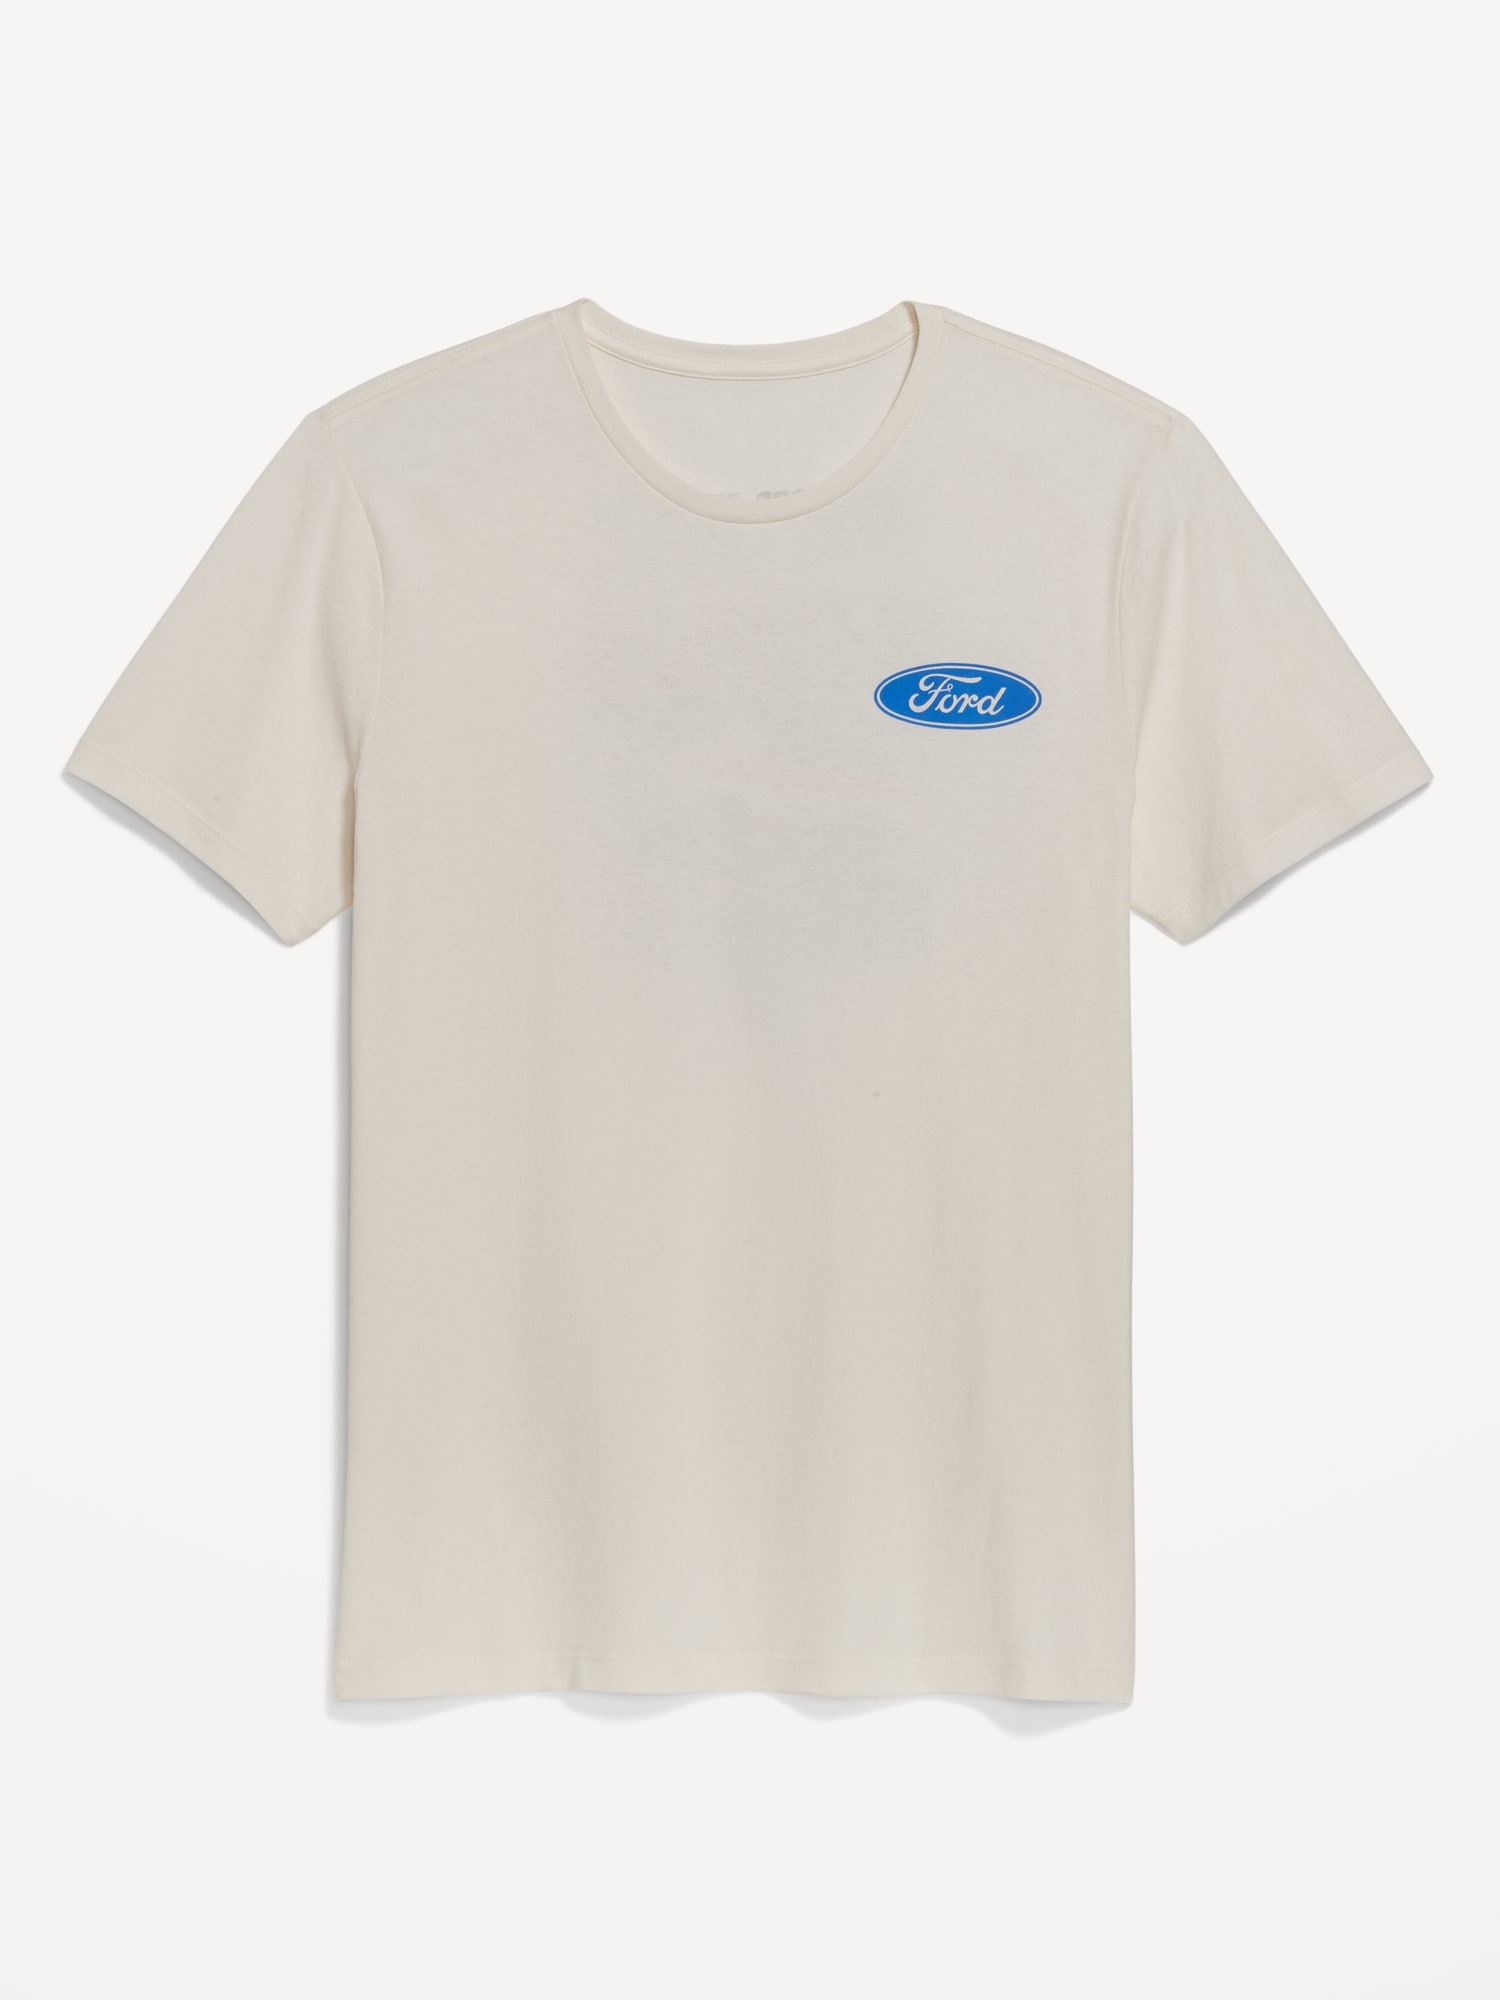 Ford Bronco™ Gender-Neutral T-Shirt for Adults